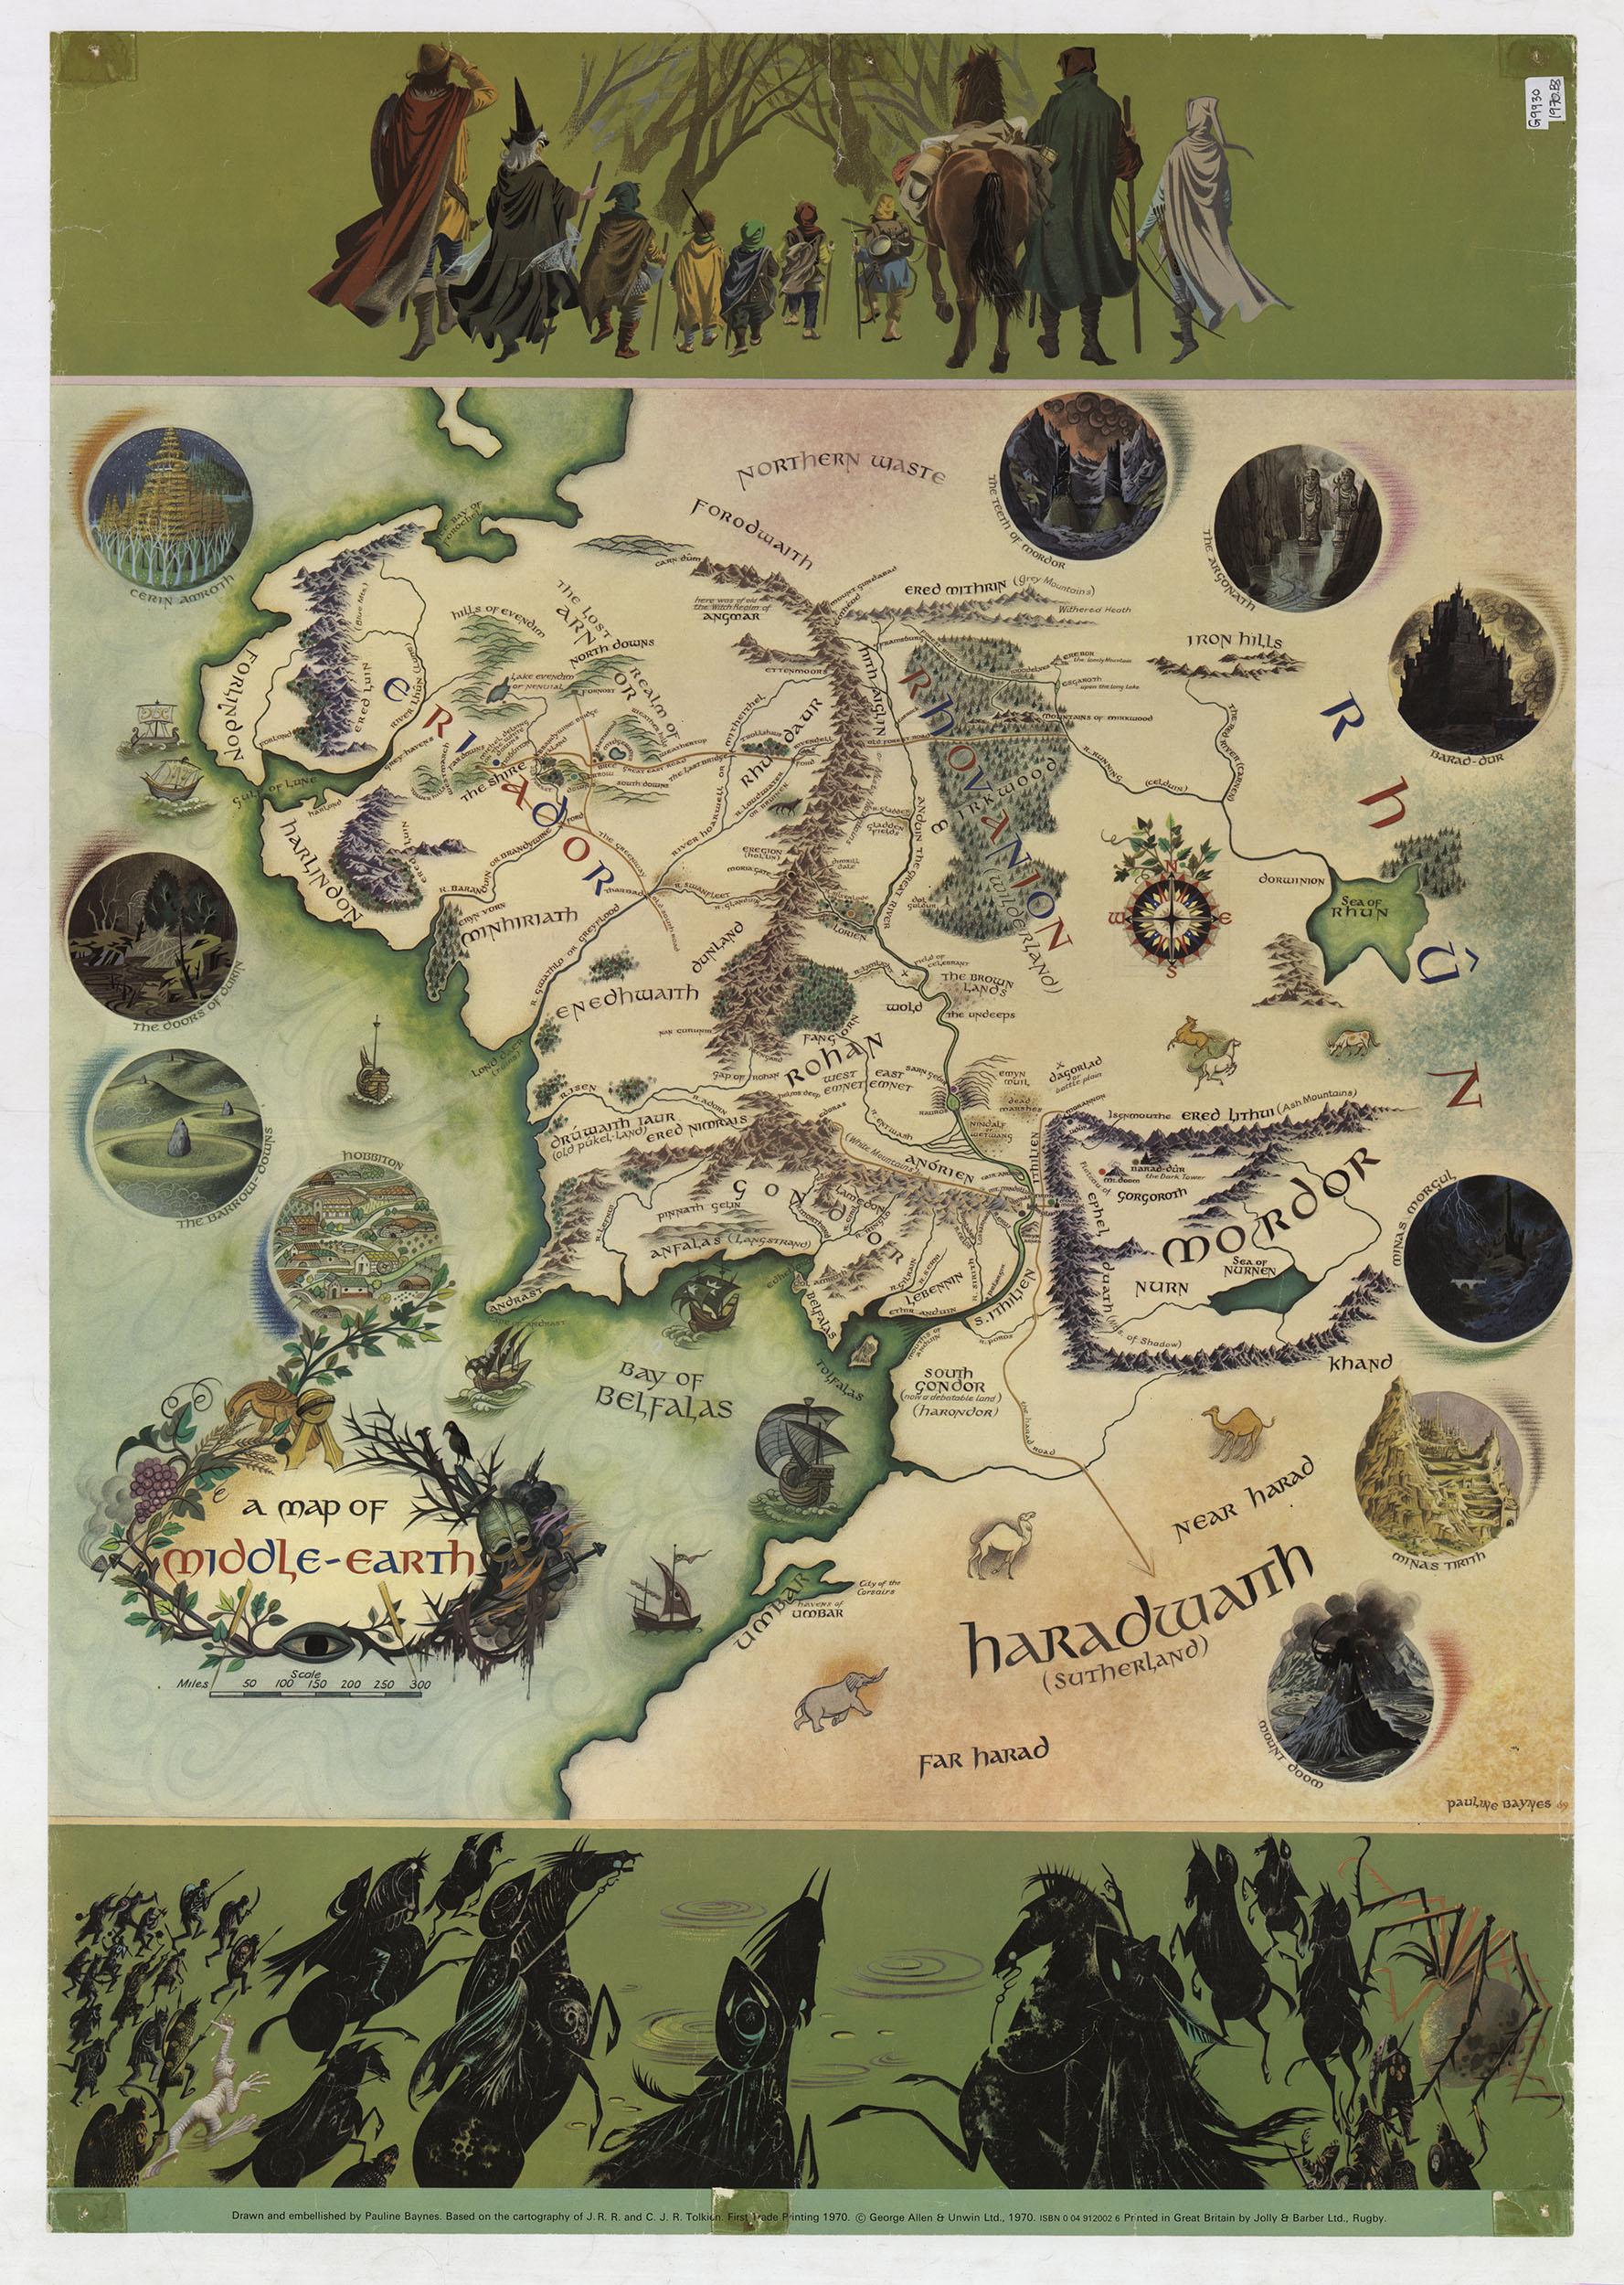 A Map of Middle-Earth used as a Lord of the Rings poster.